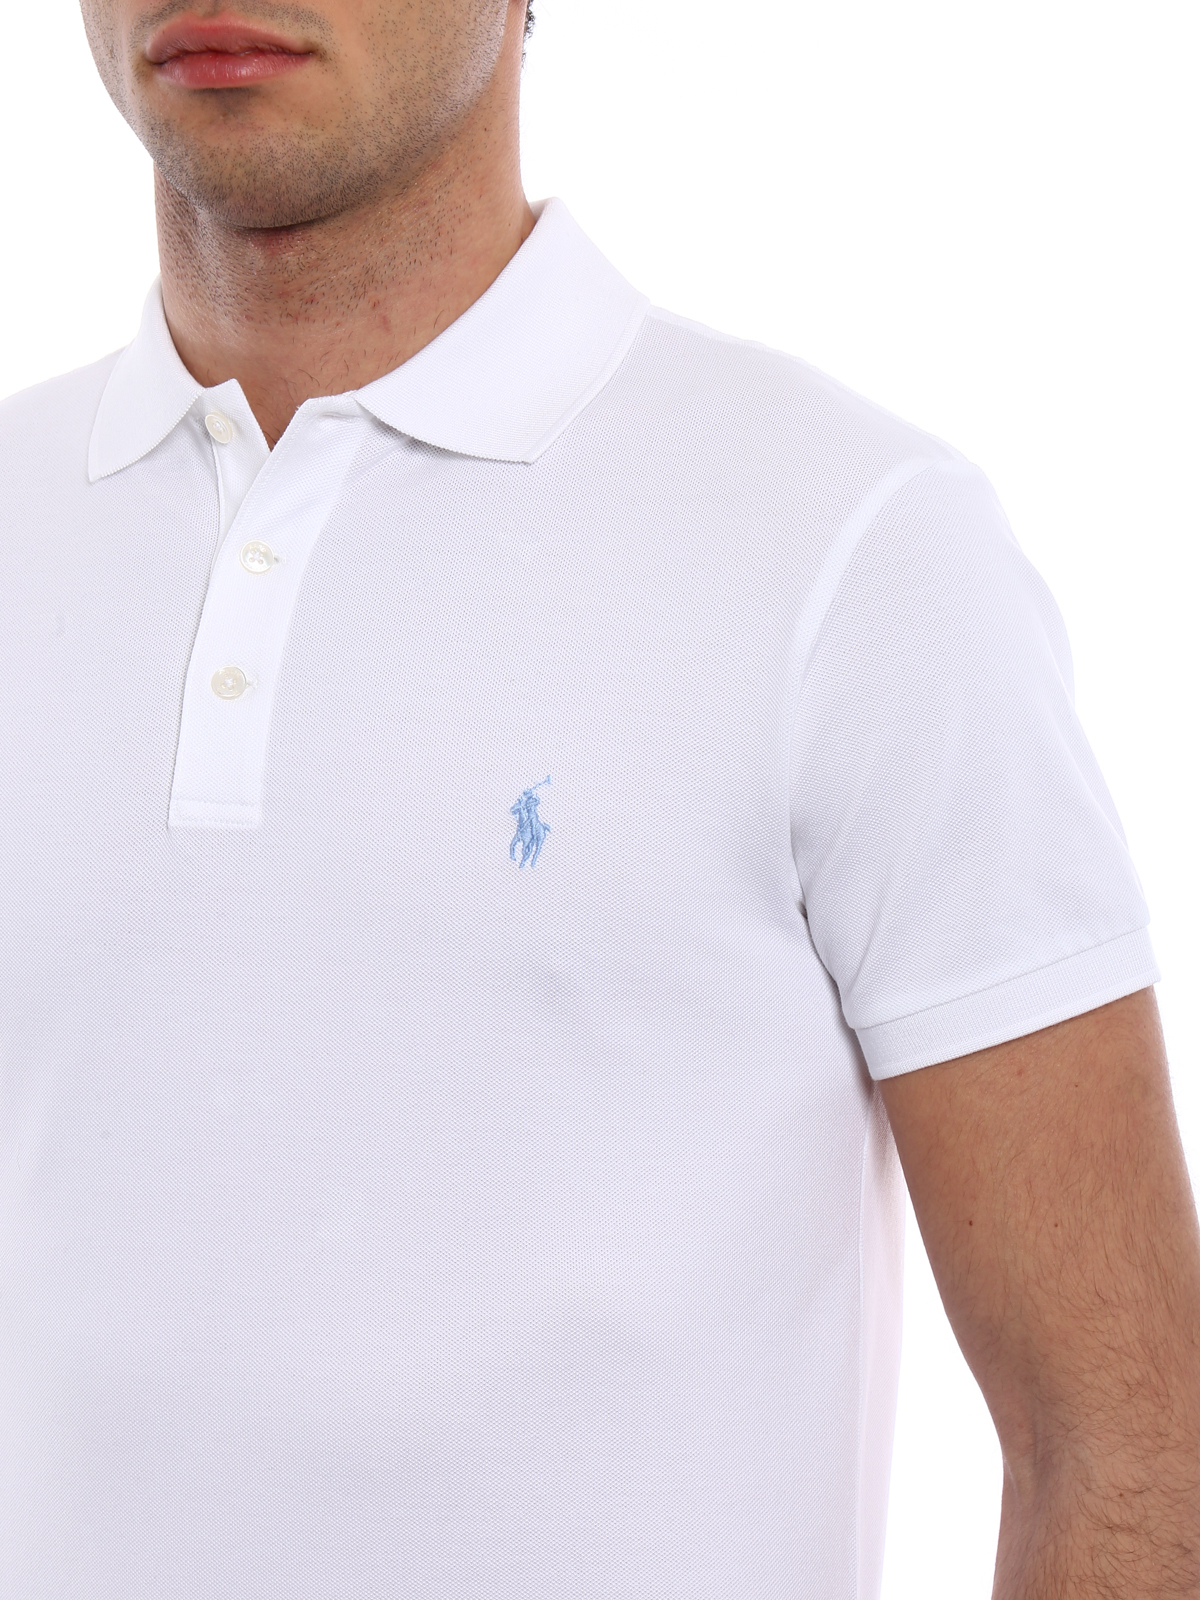 white polo shirt with light blue horse